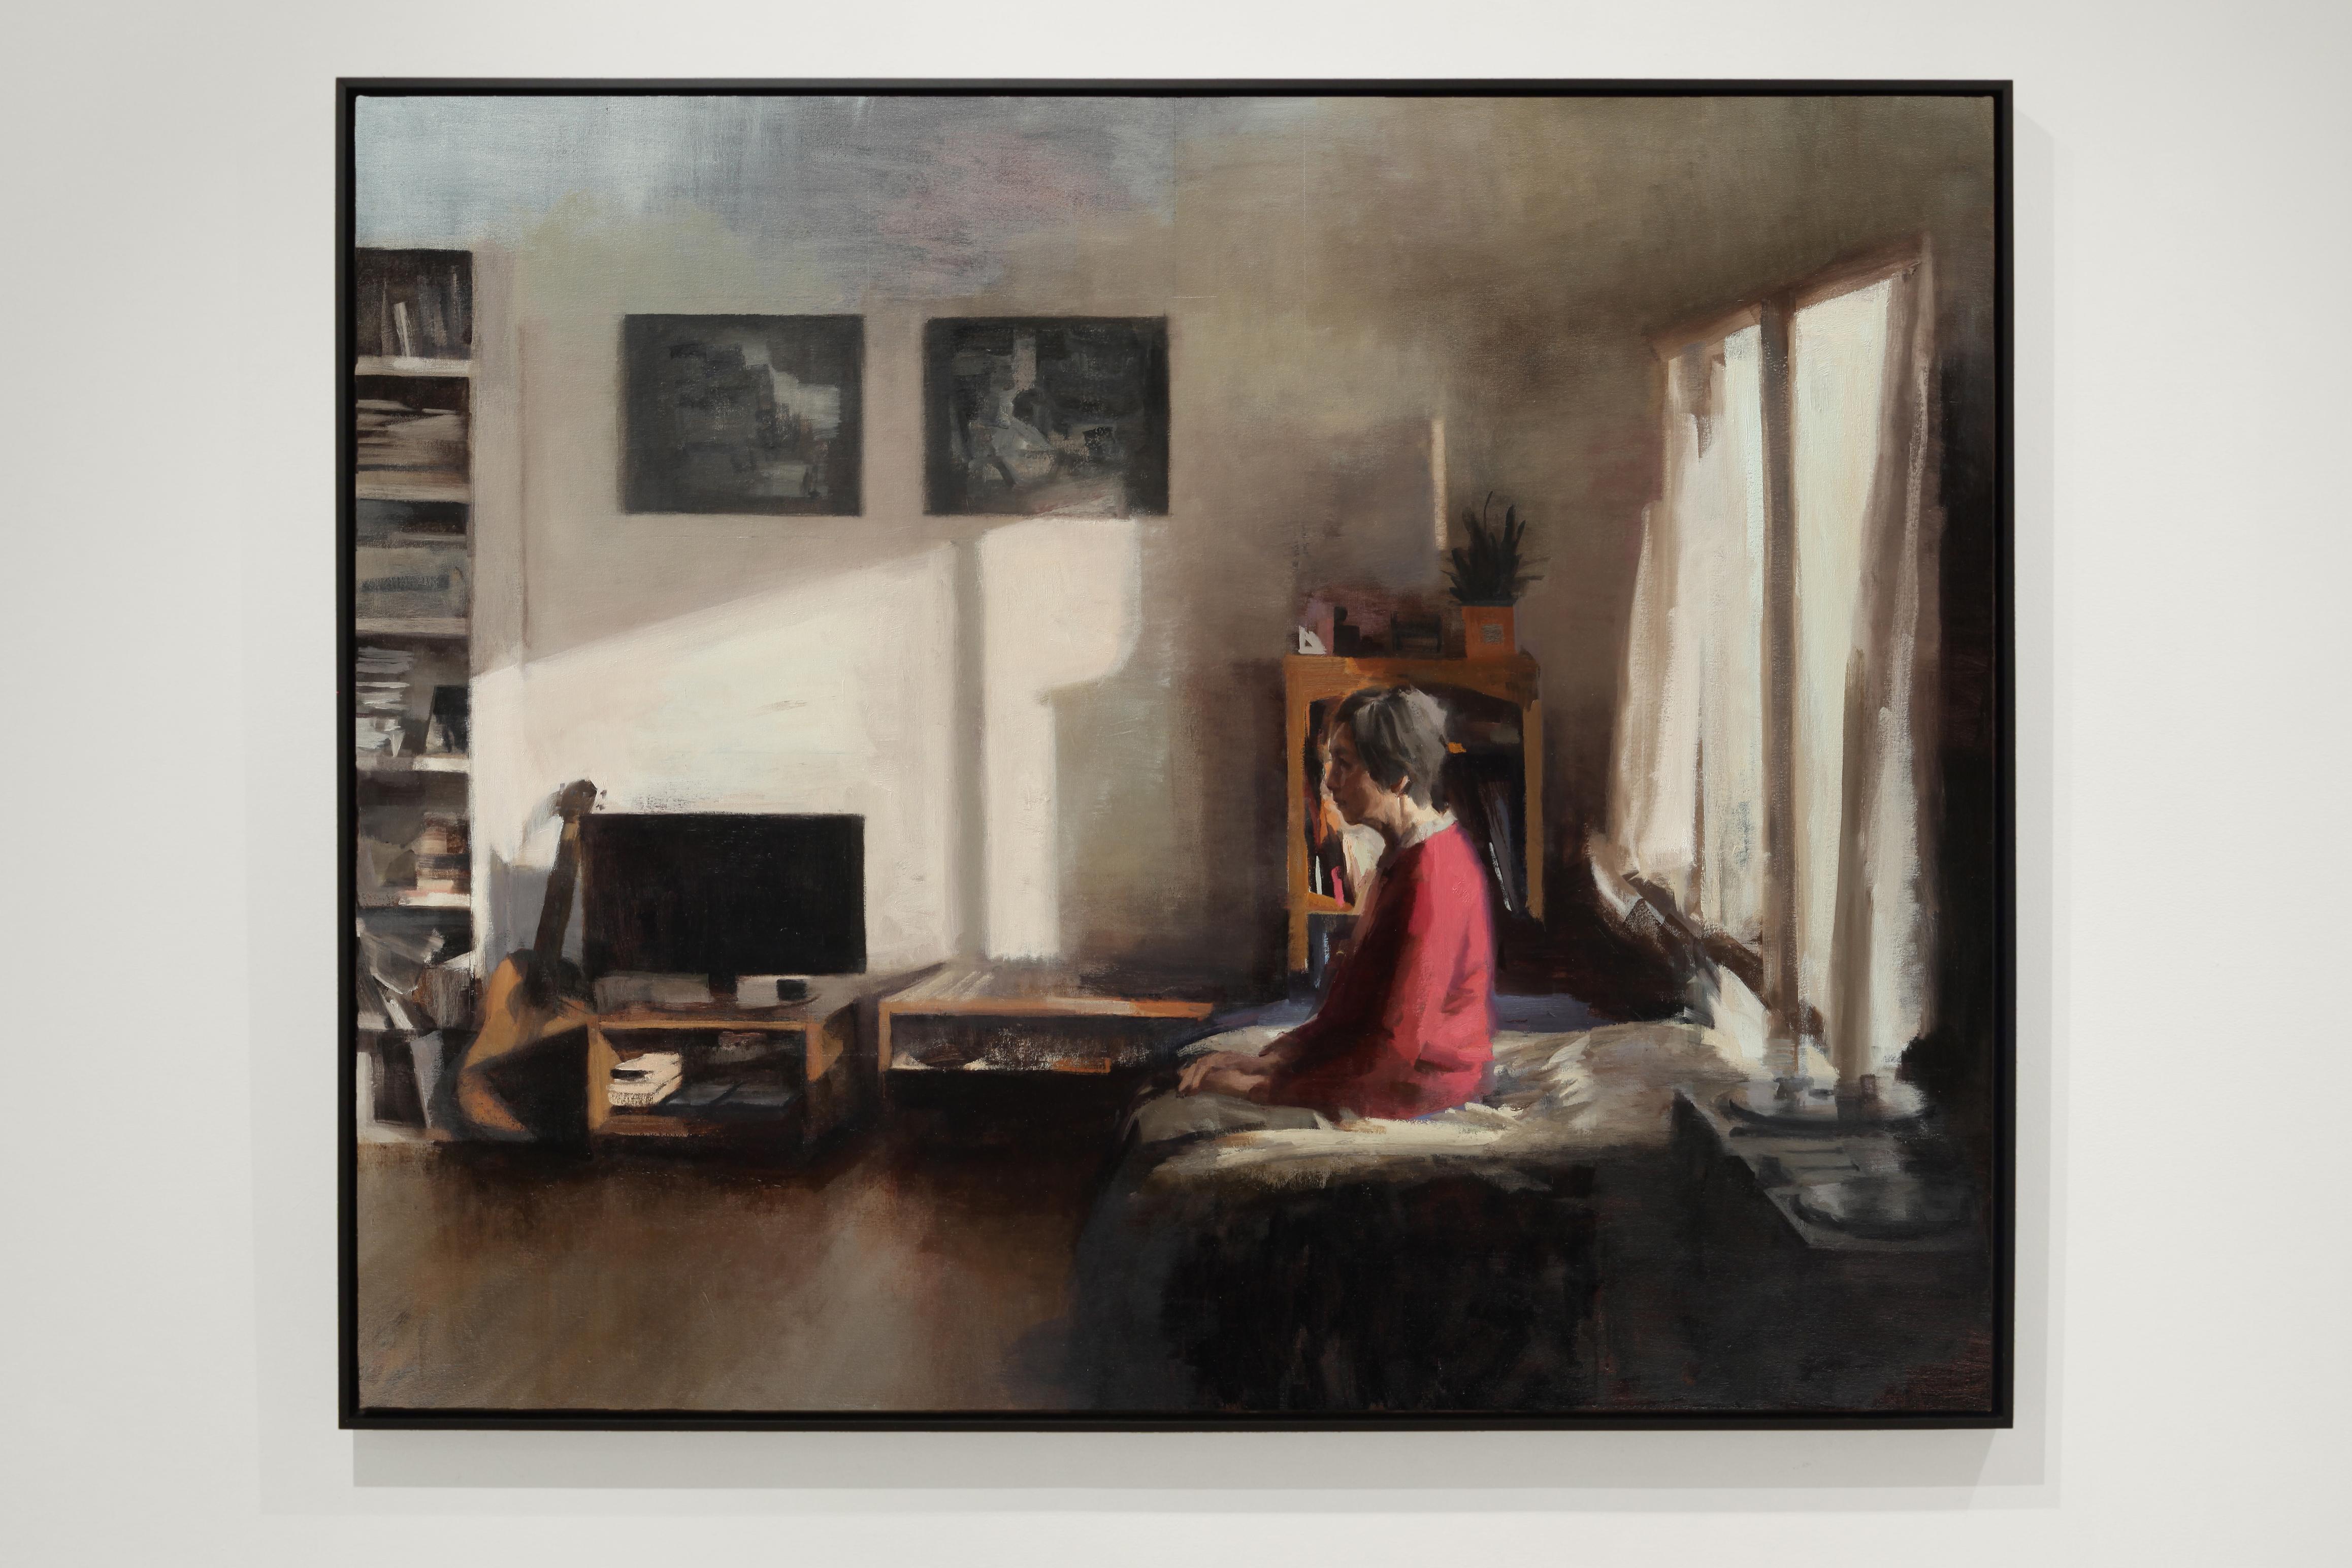 WISH YOU WERE HERE, woman in room, hyper-realistic, somber, room in daylight - Painting by Kim Cogan